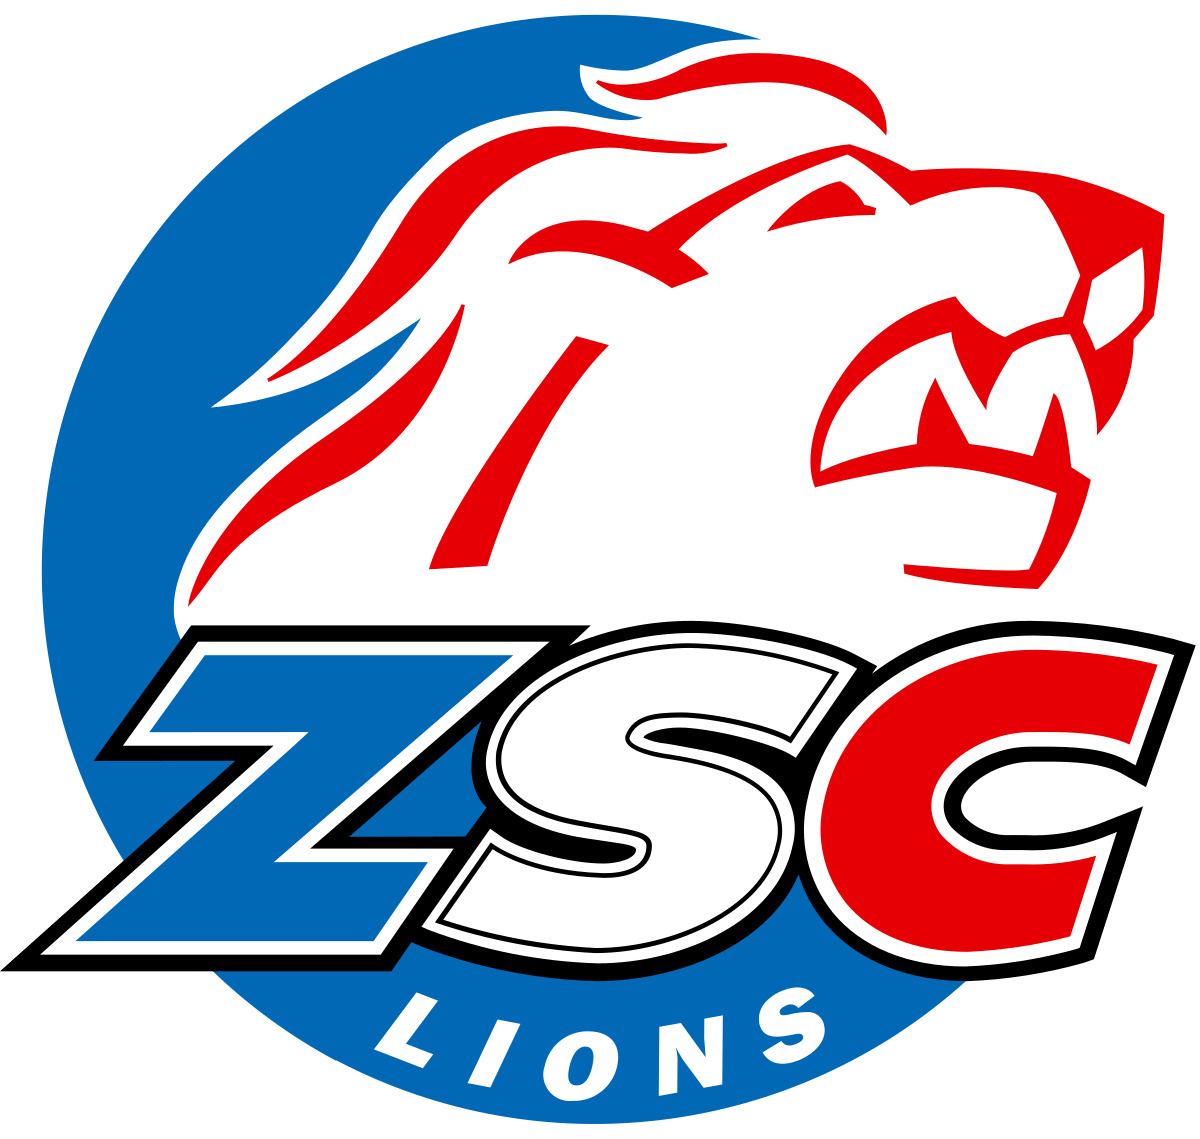 ZSC Lions Zurich Logo icons